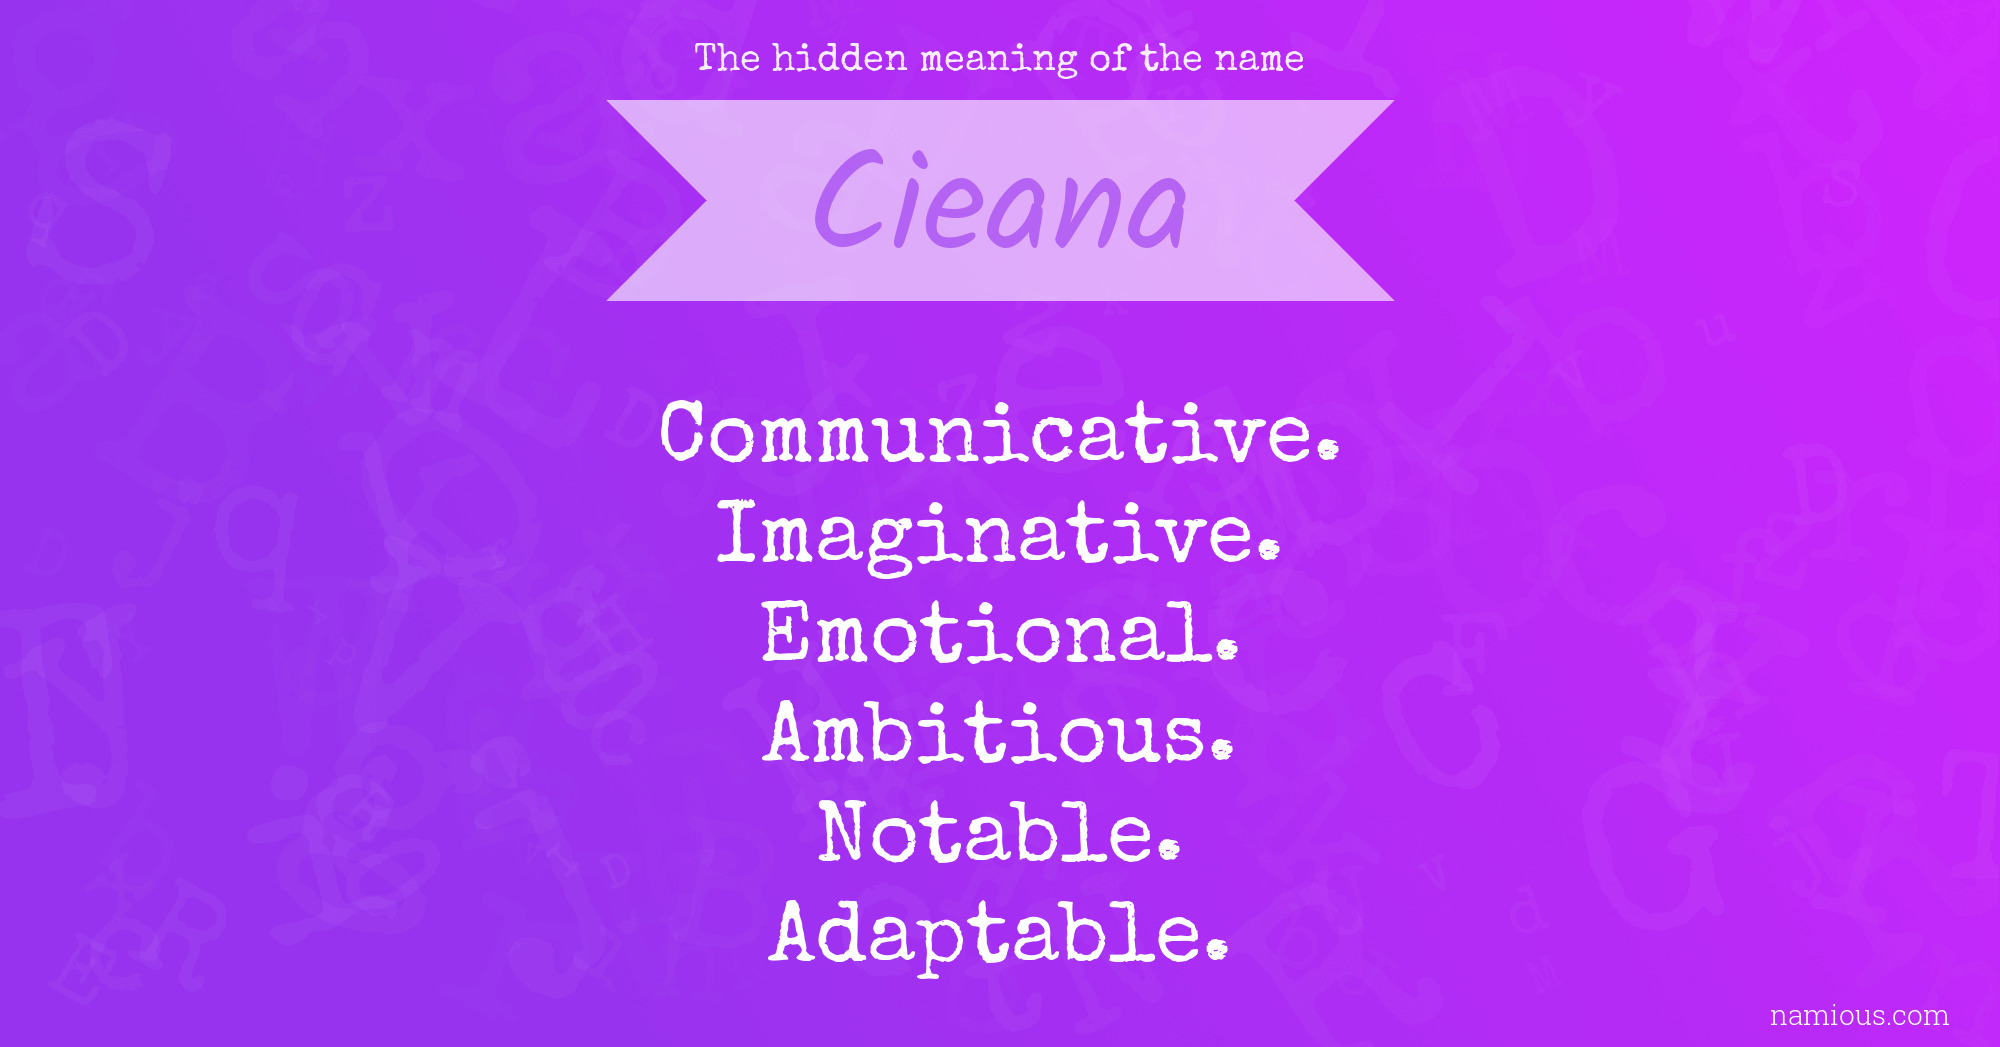 The hidden meaning of the name Cieana